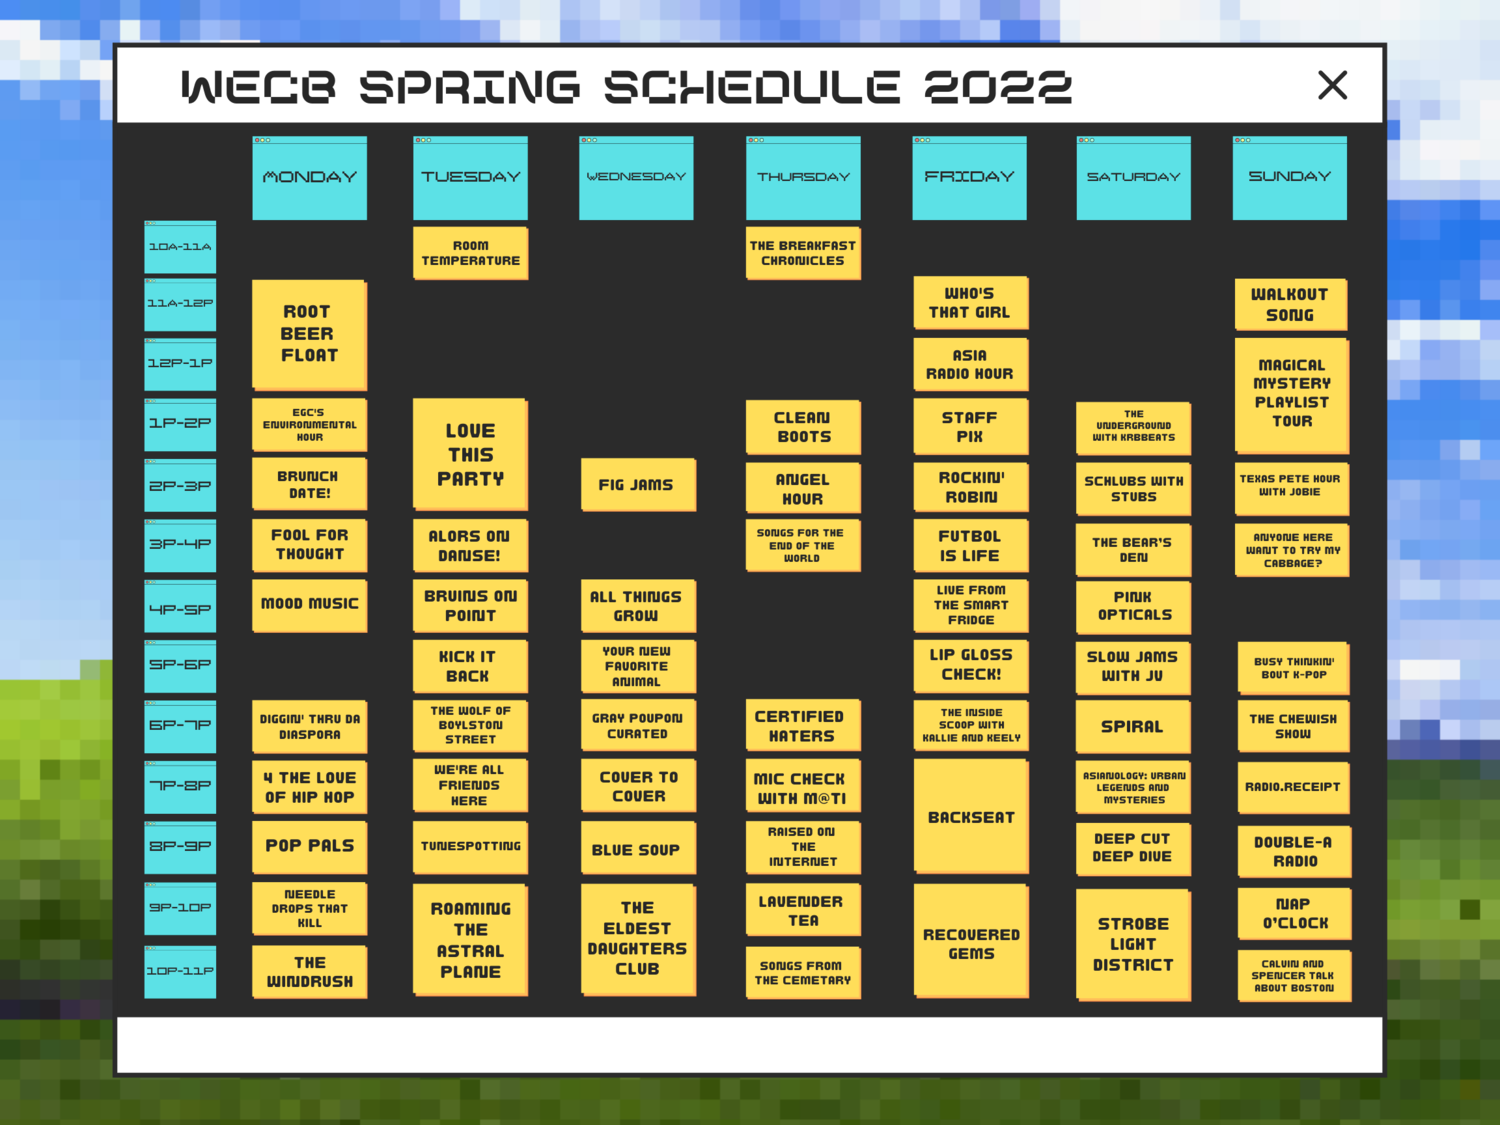 WECB+SPRING+SCHEDULE+2022+UPDATED.png